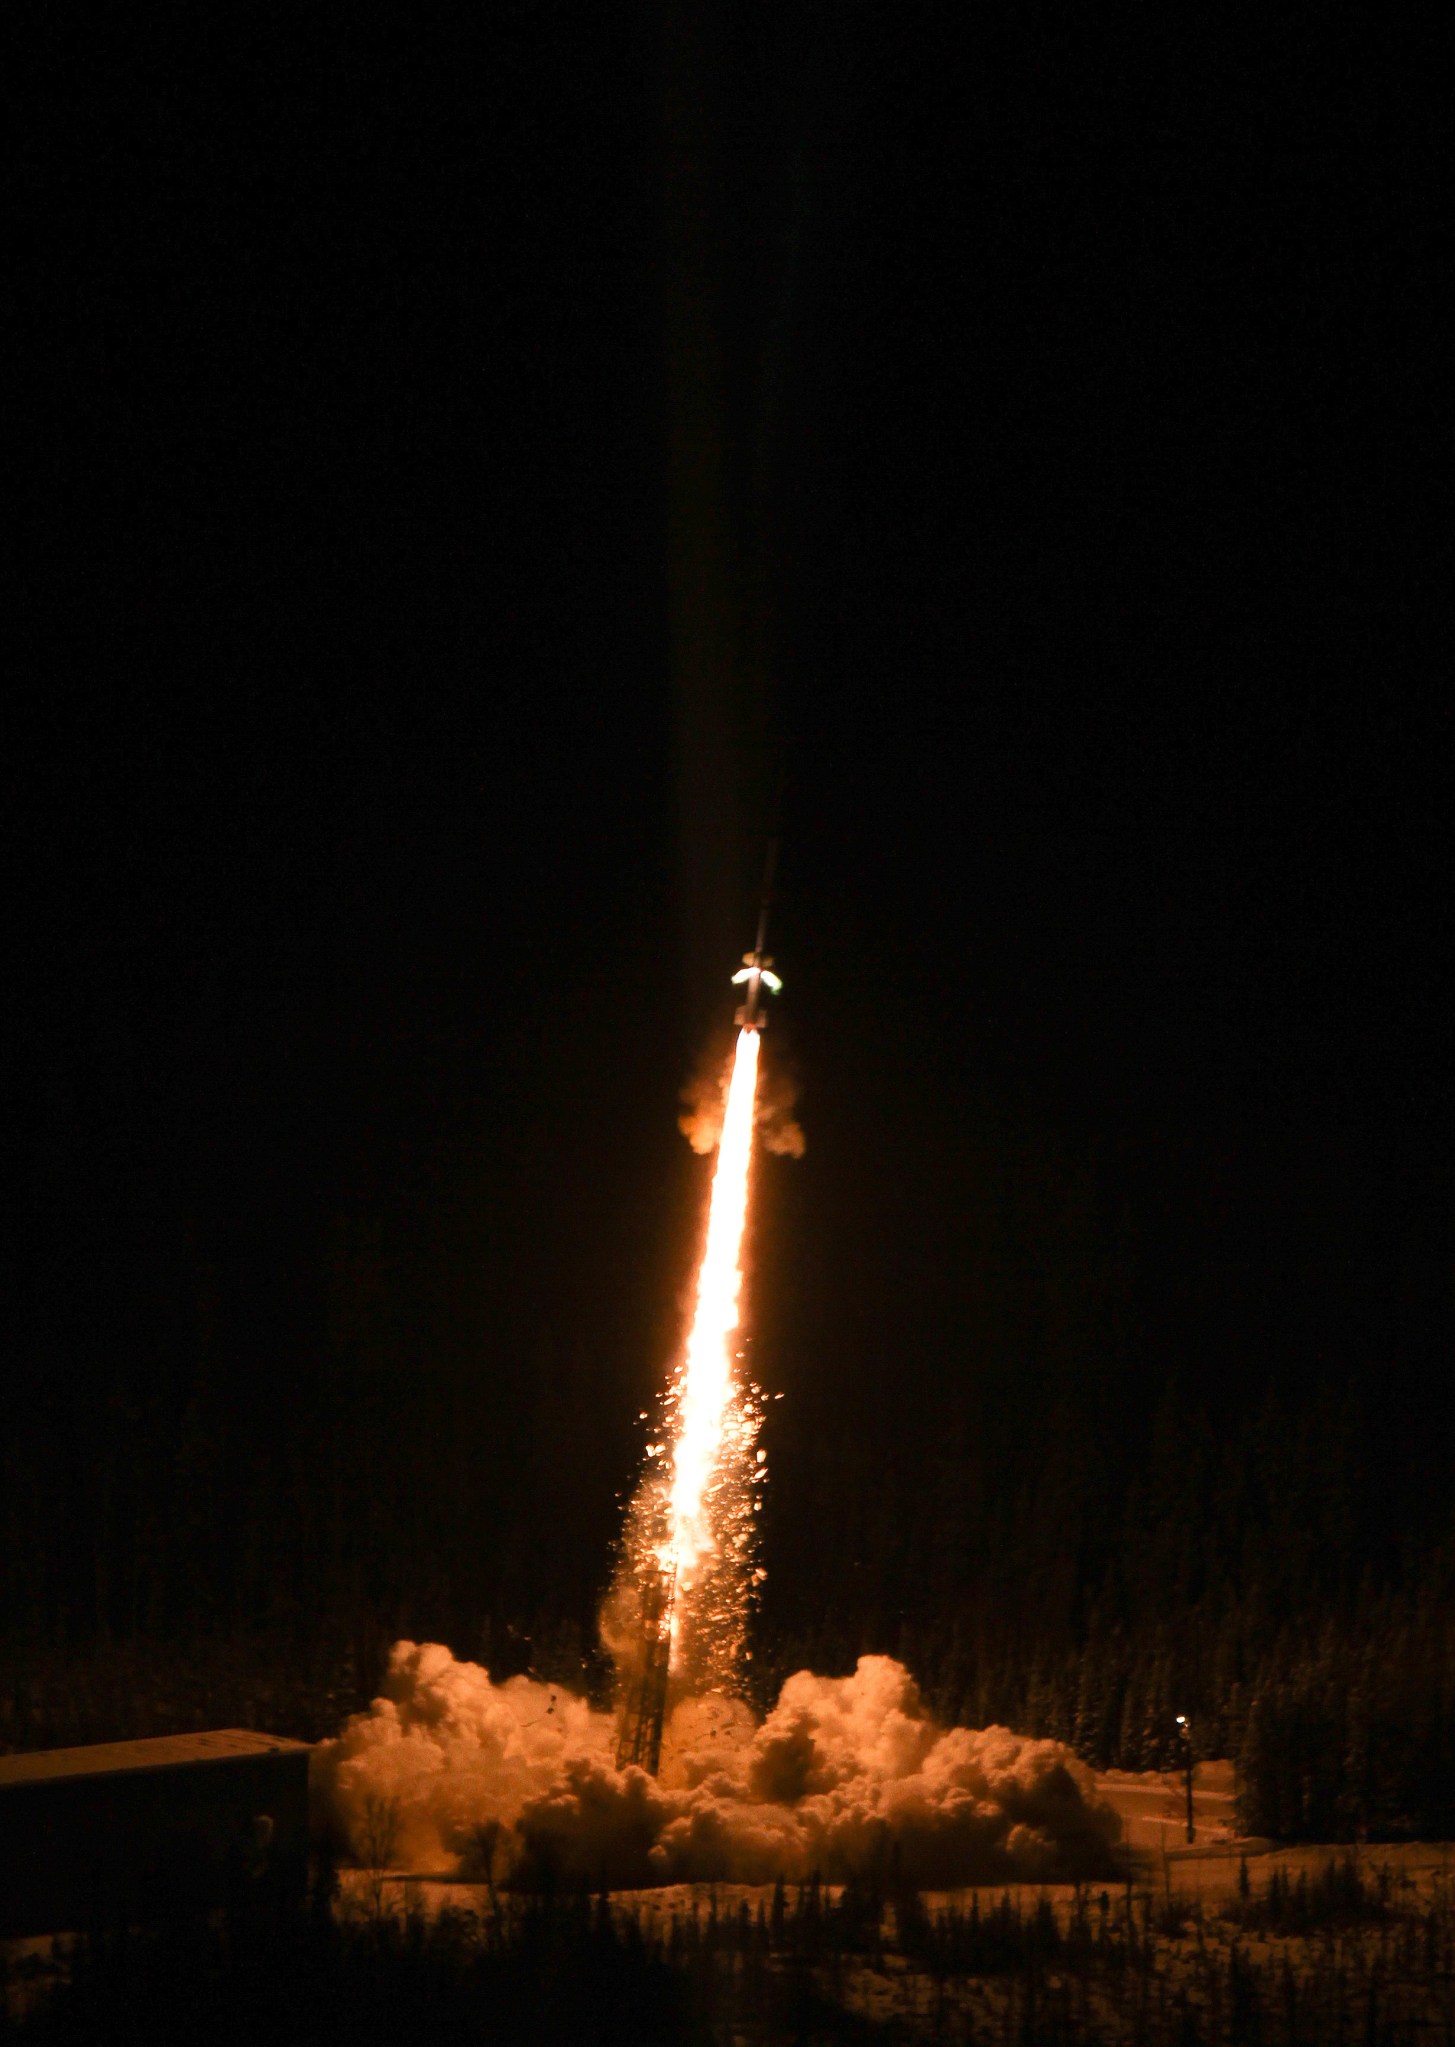 An image of a sounding rocket launching at night, the rocket just visible over a stream and cloud of bright orange flame.